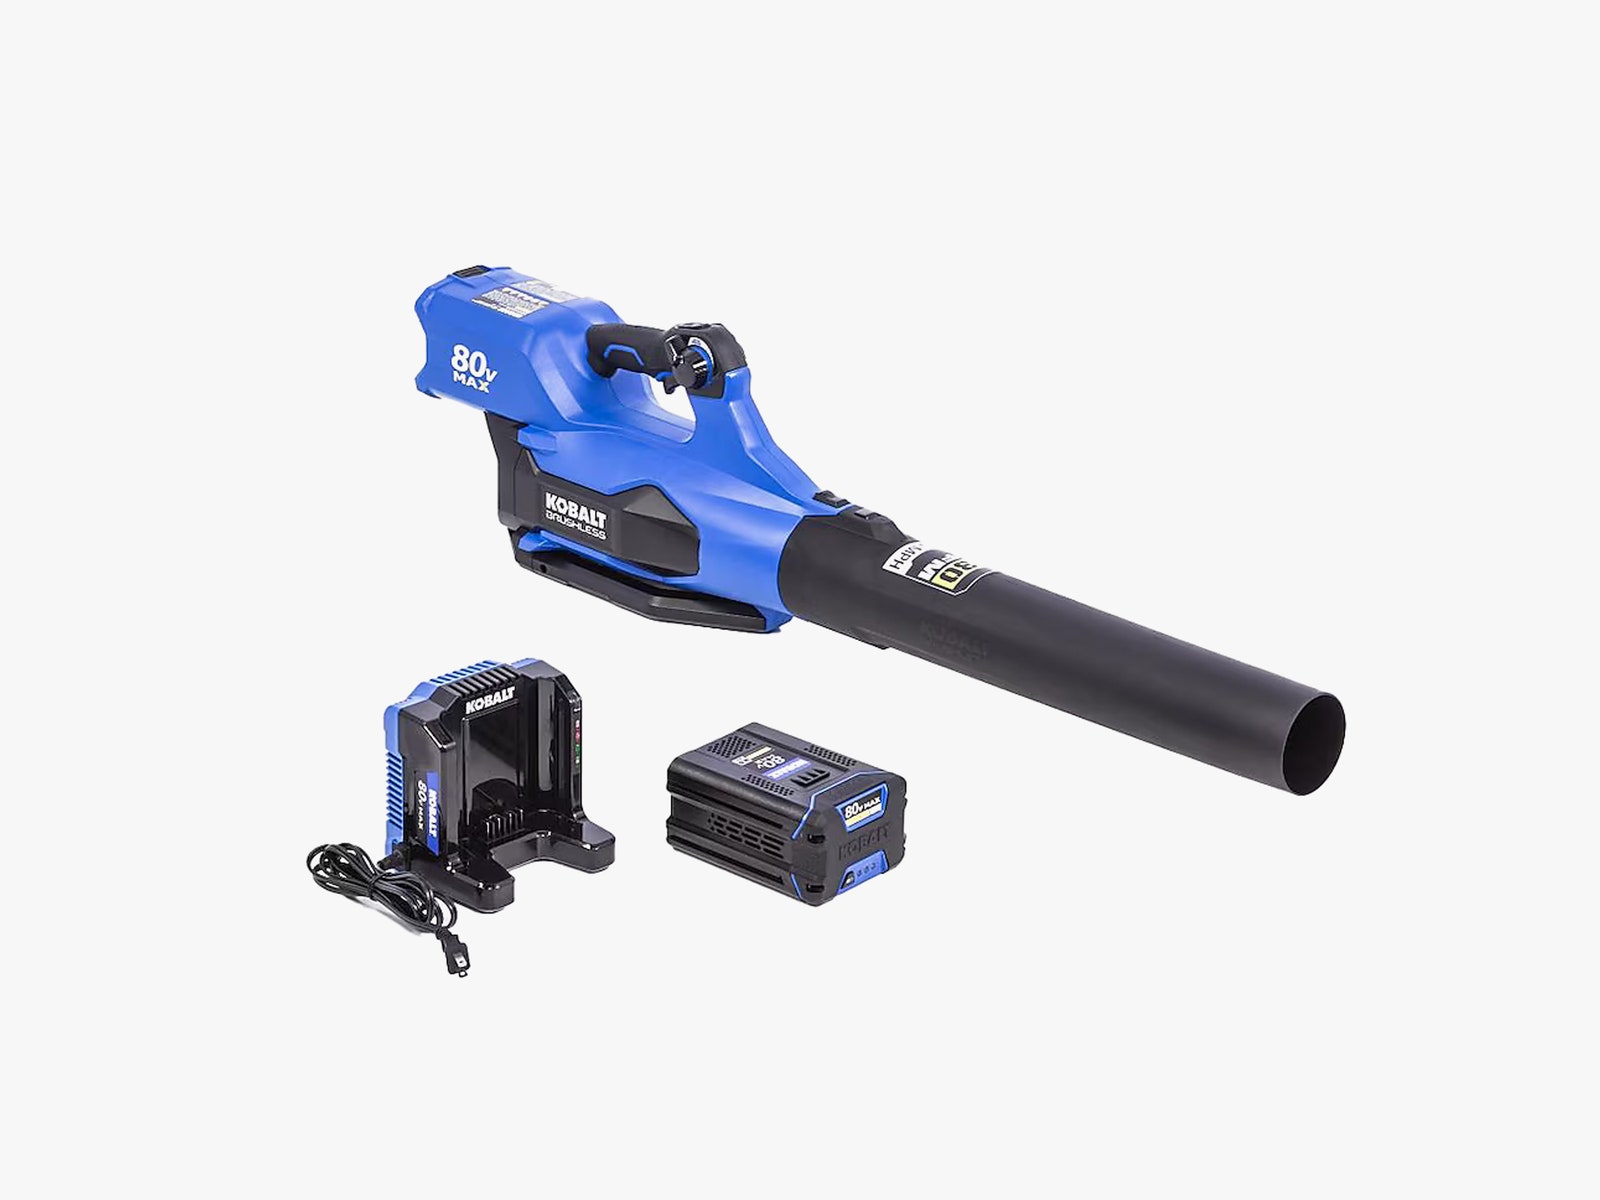 Black and blue leaf blower with charger on the side